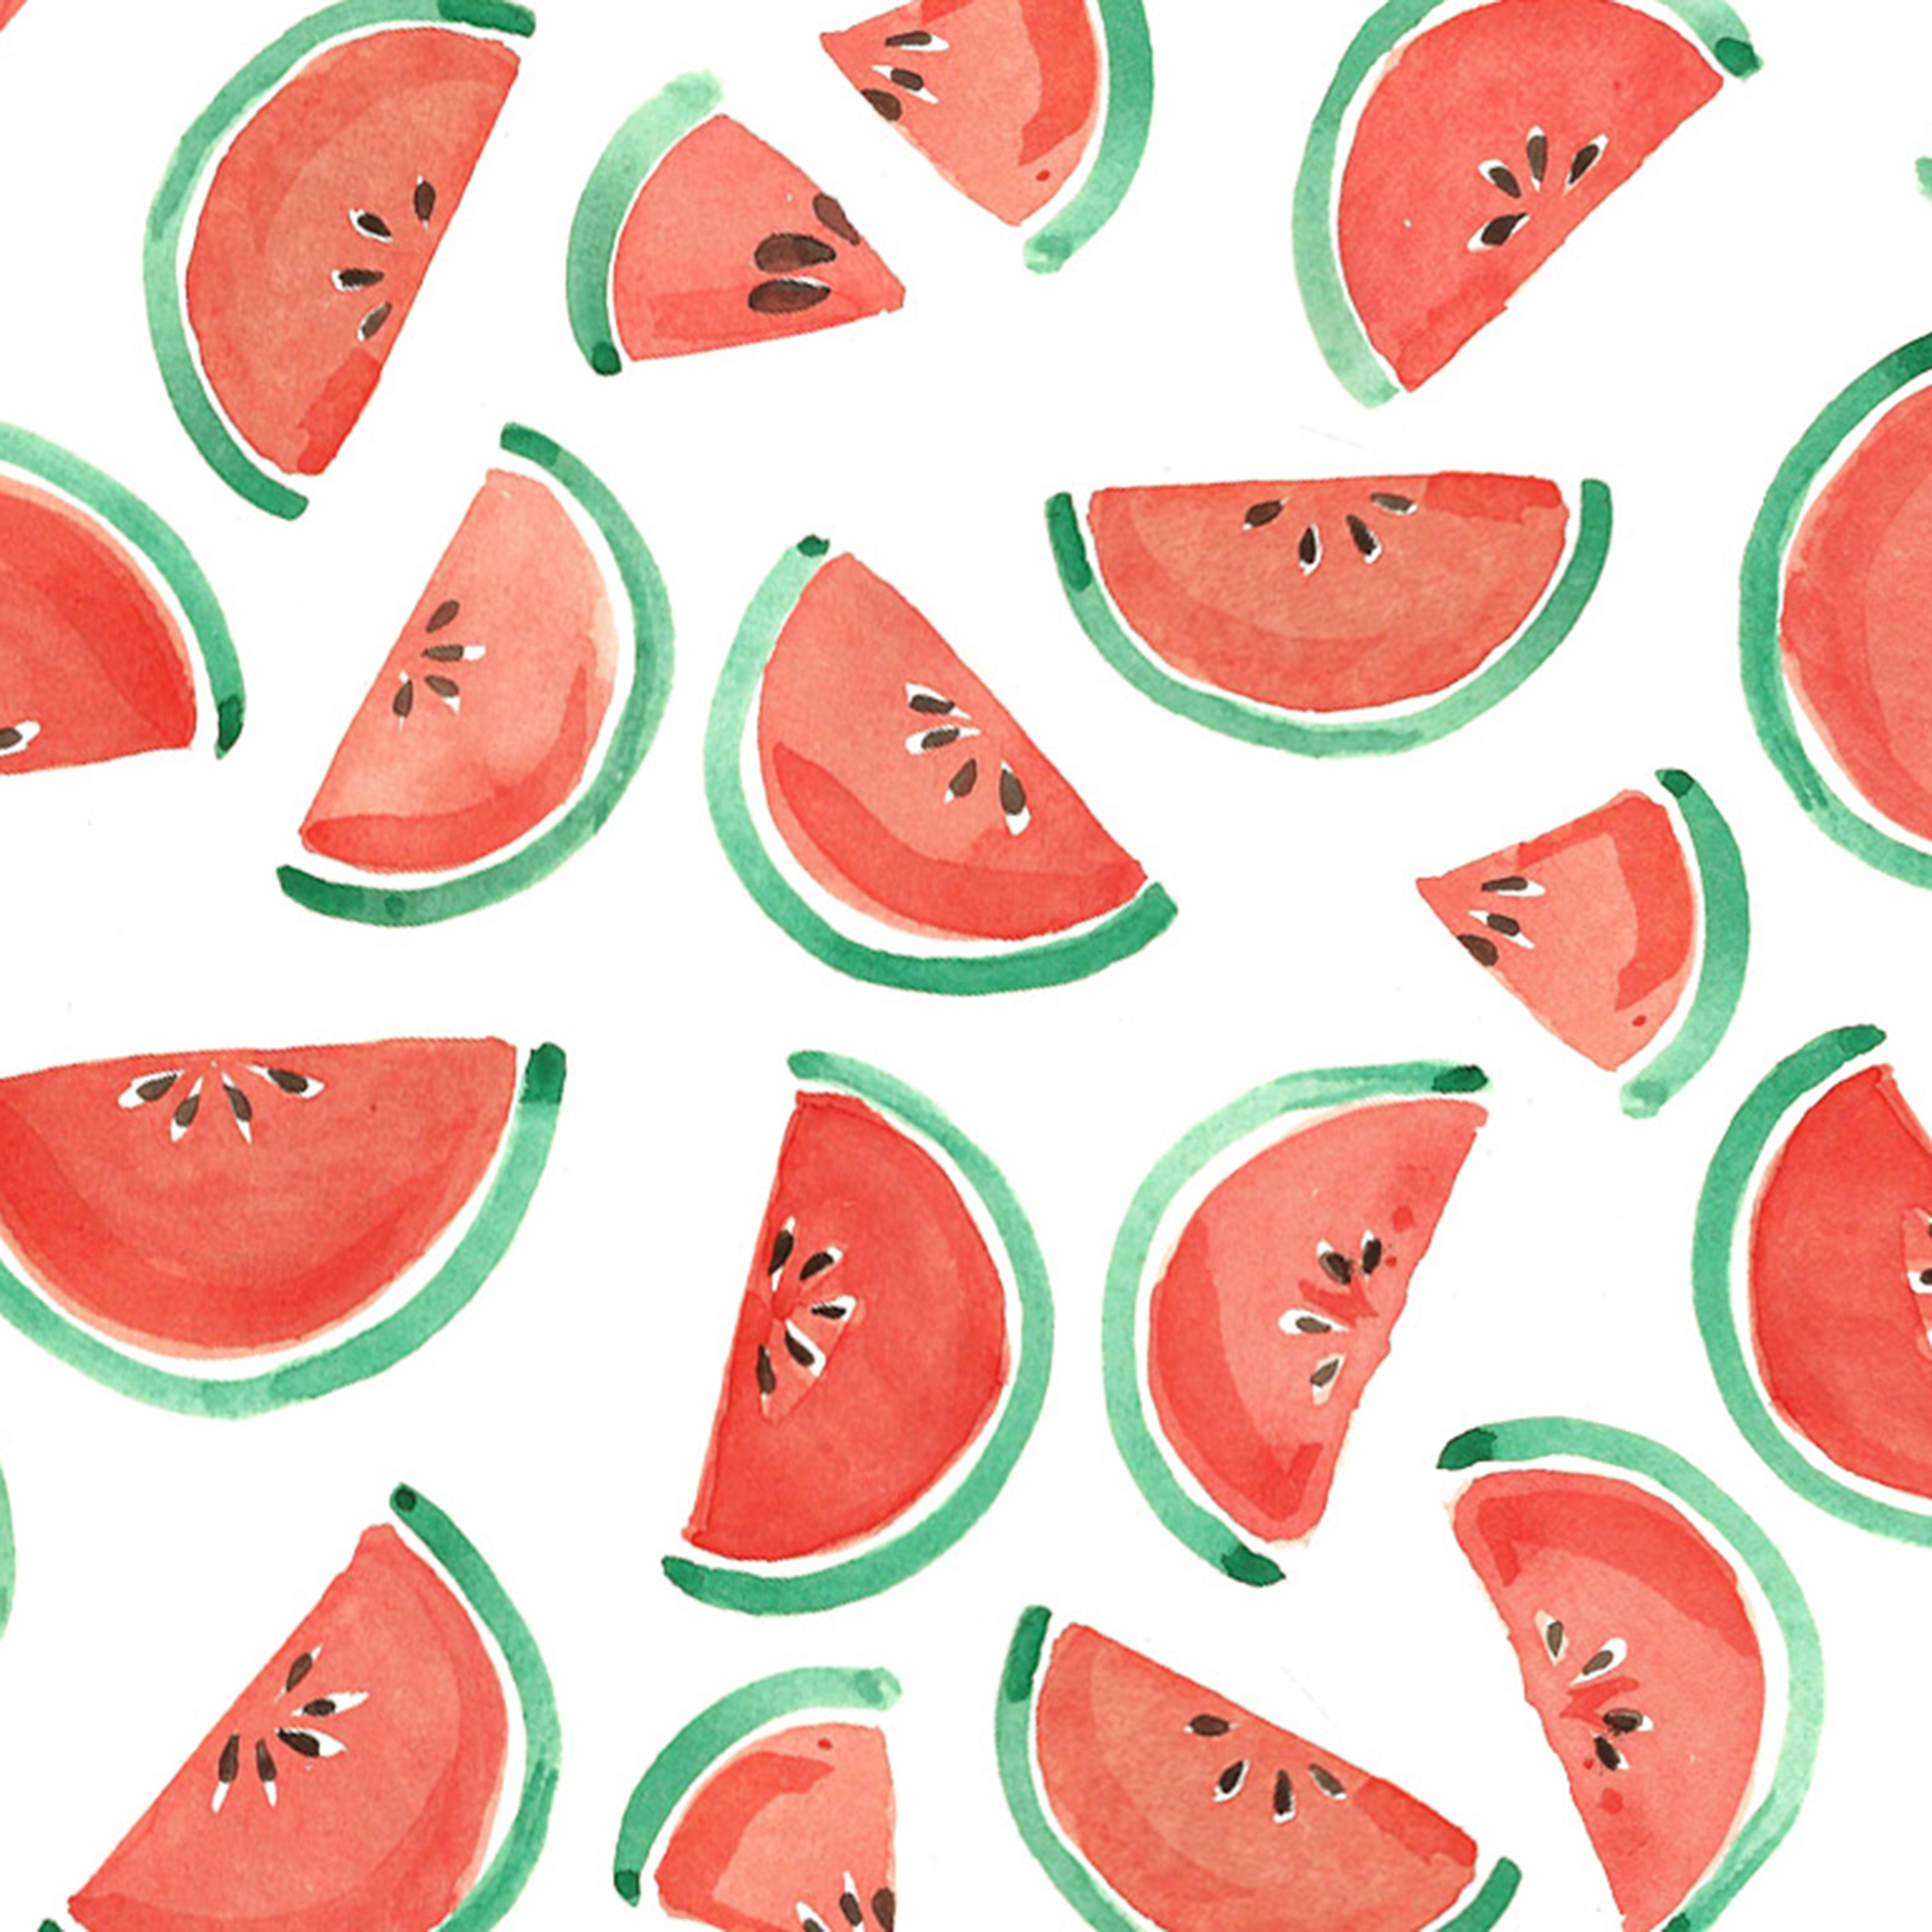 watermelon background tumblr 9 | Background Check All